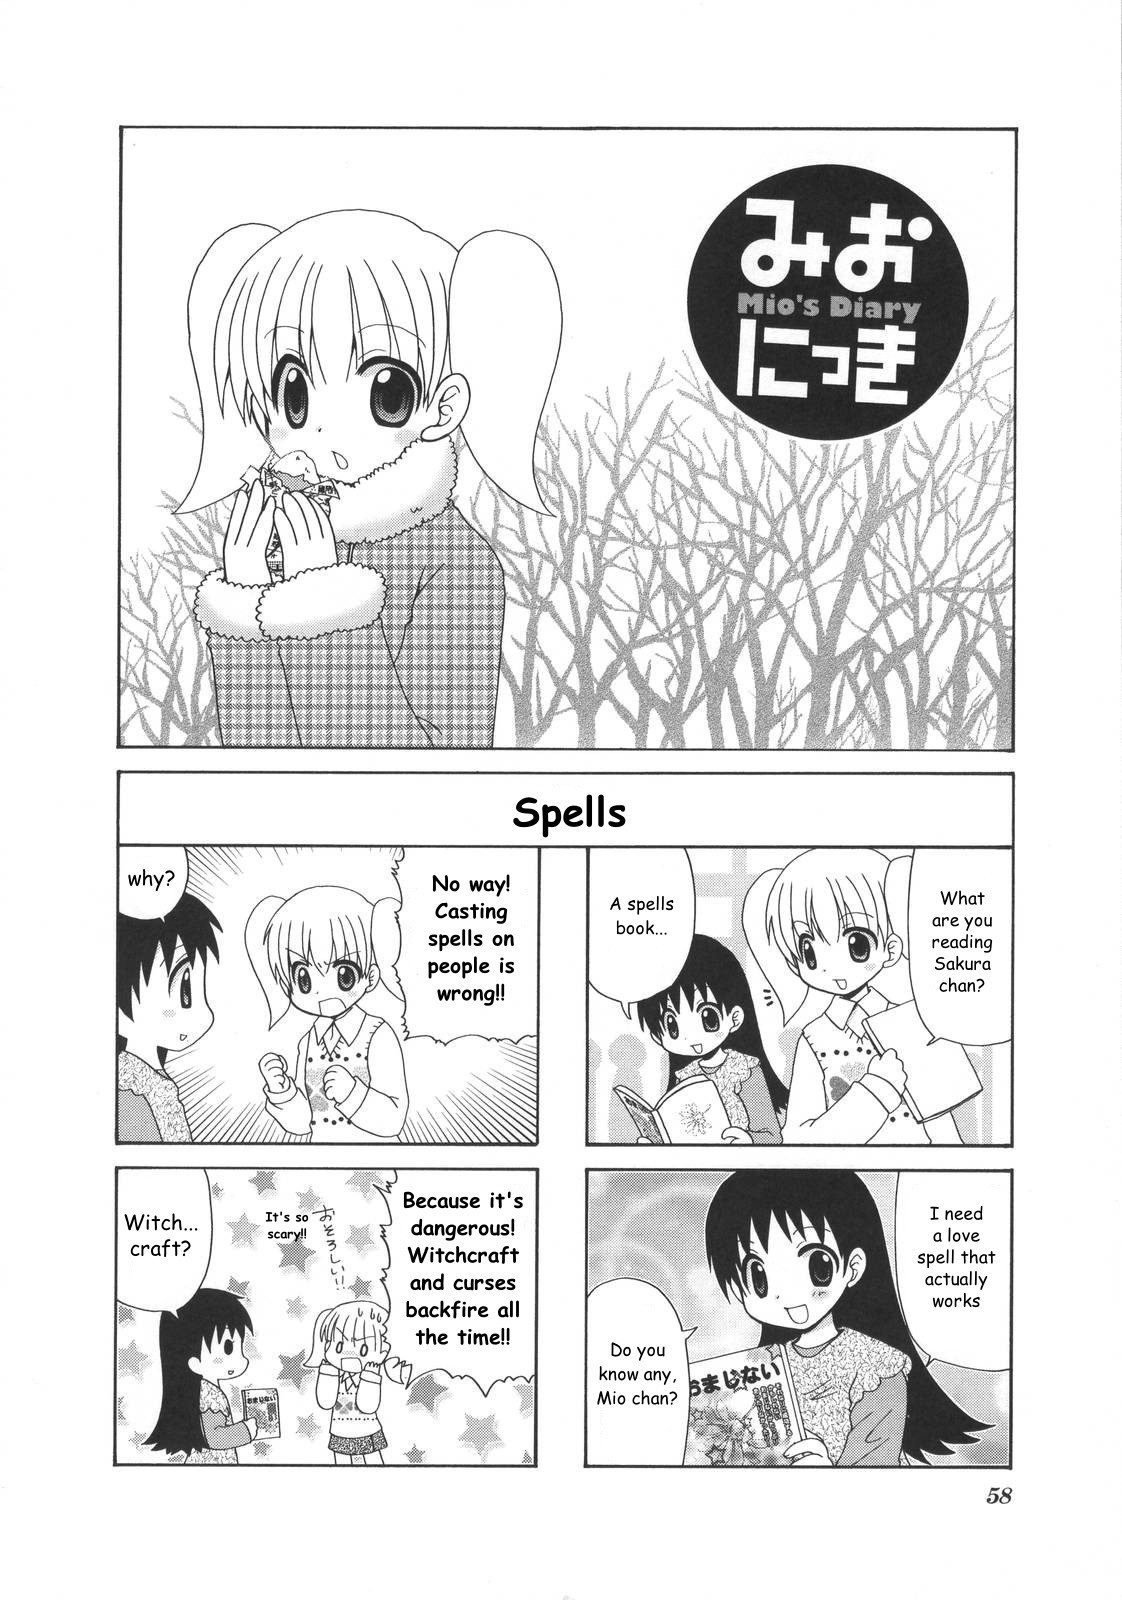 Mio's Diary Chapter 14 #1